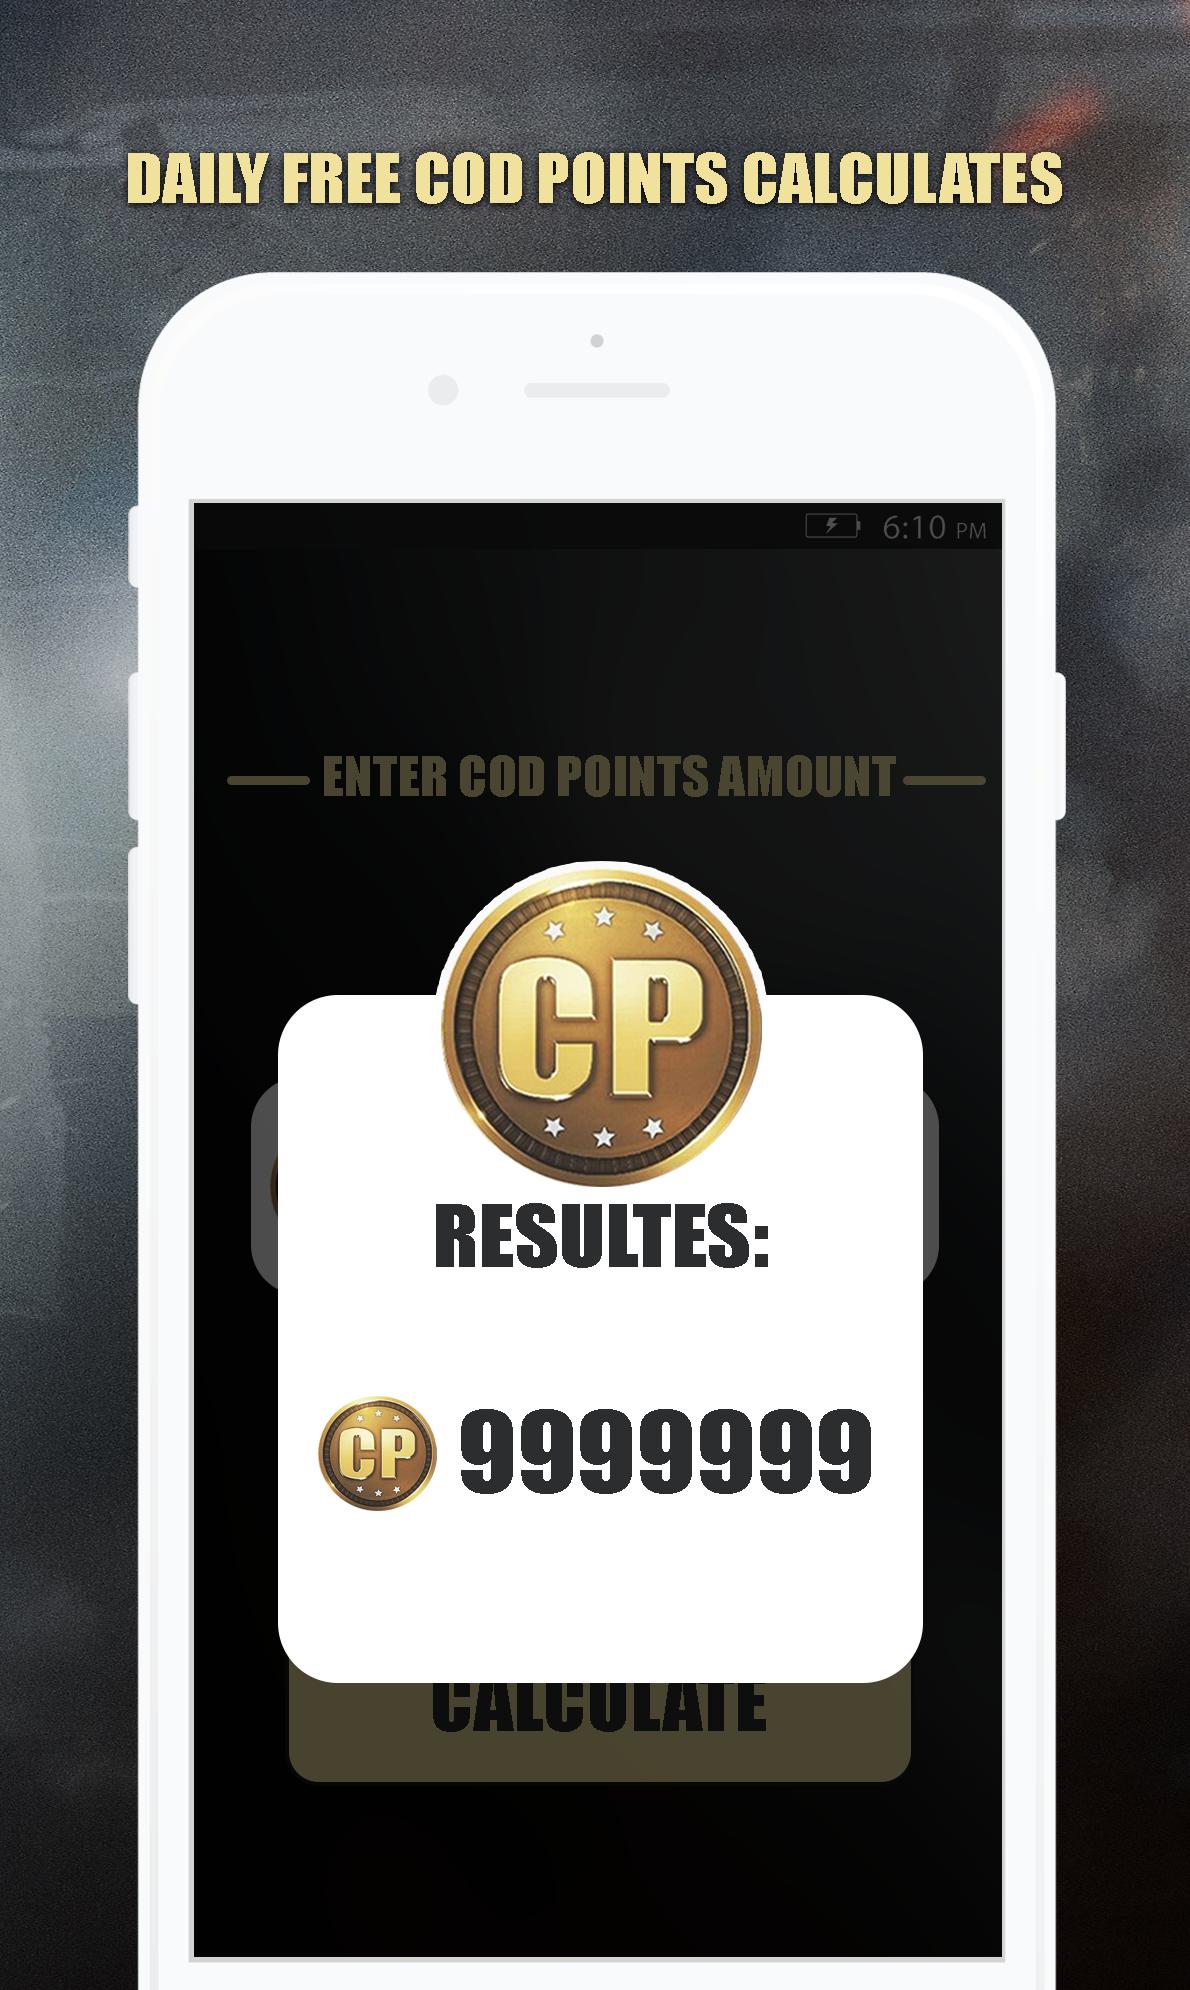 [Unlimited] Free Cod Points & Credits Play Call Of Duty Mobile Online